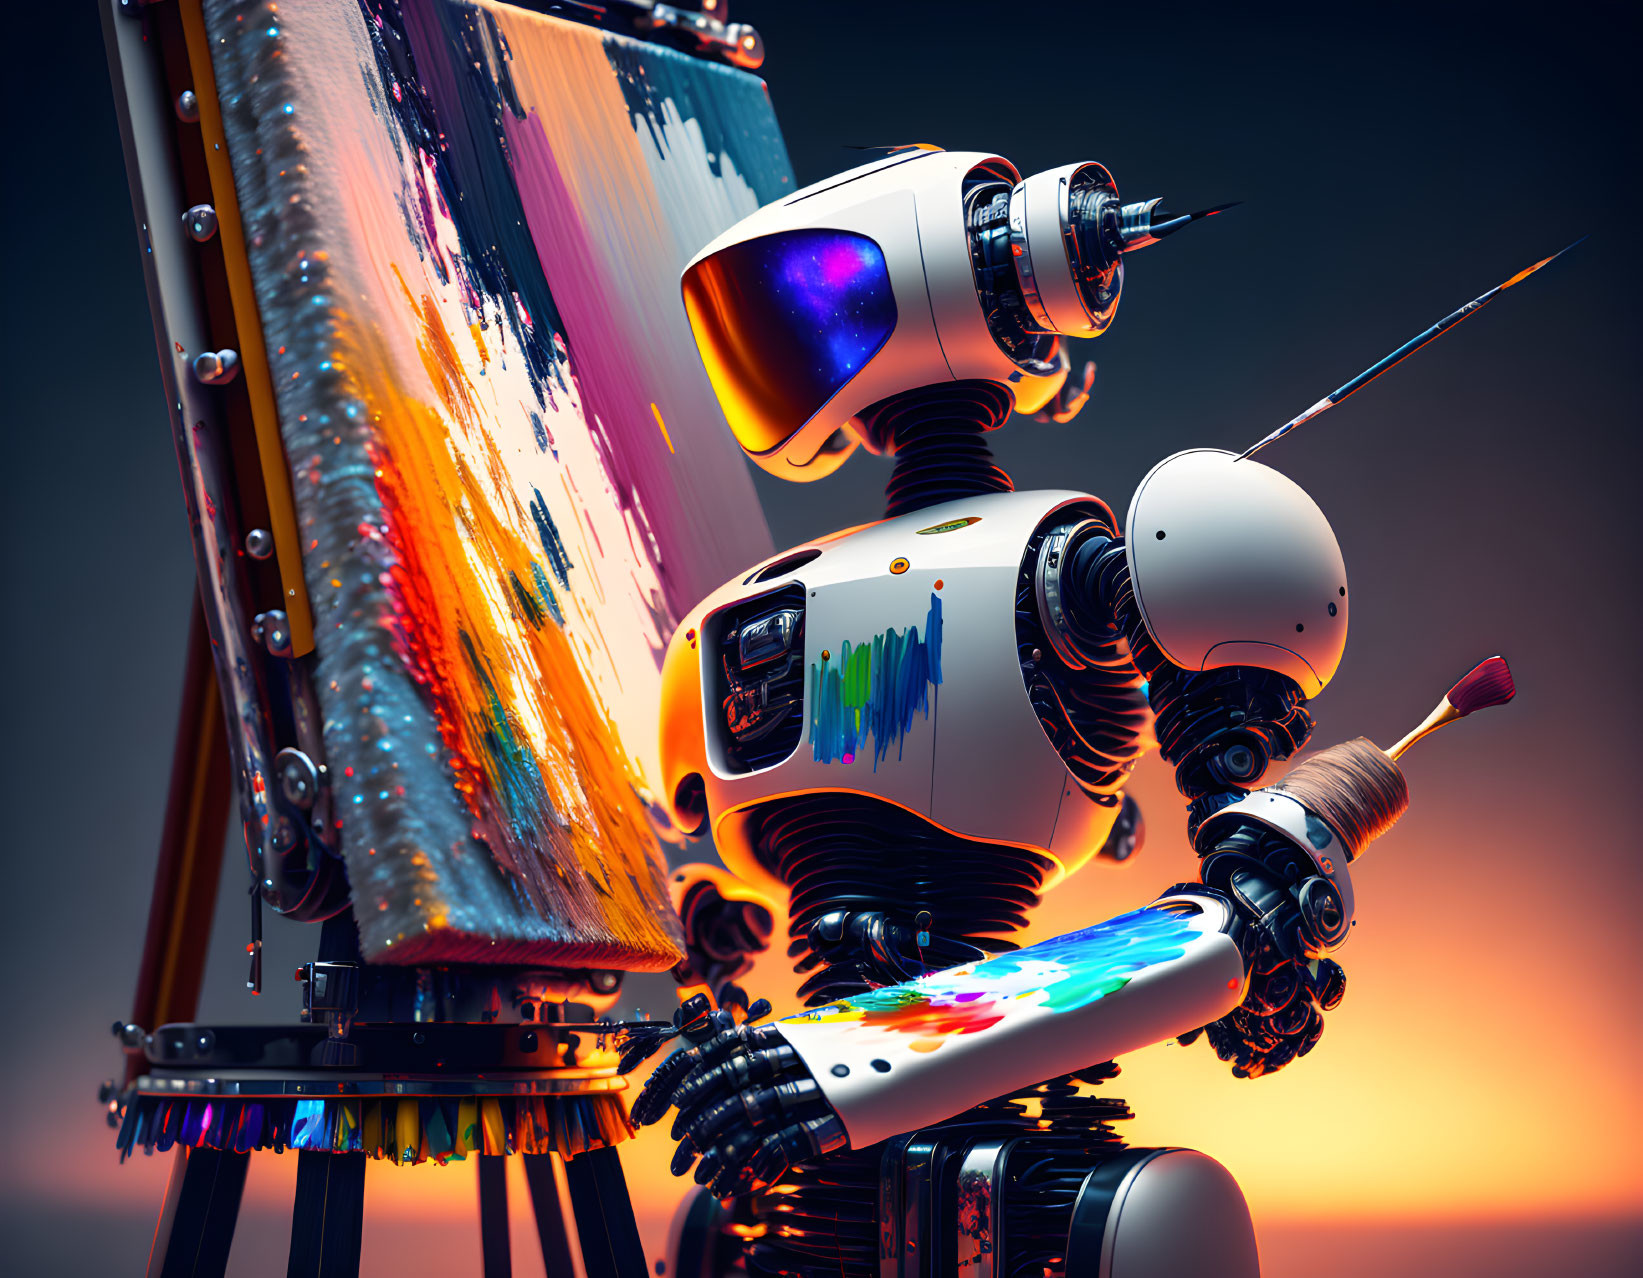 Robot painting colorful strokes on canvas against warm backdrop